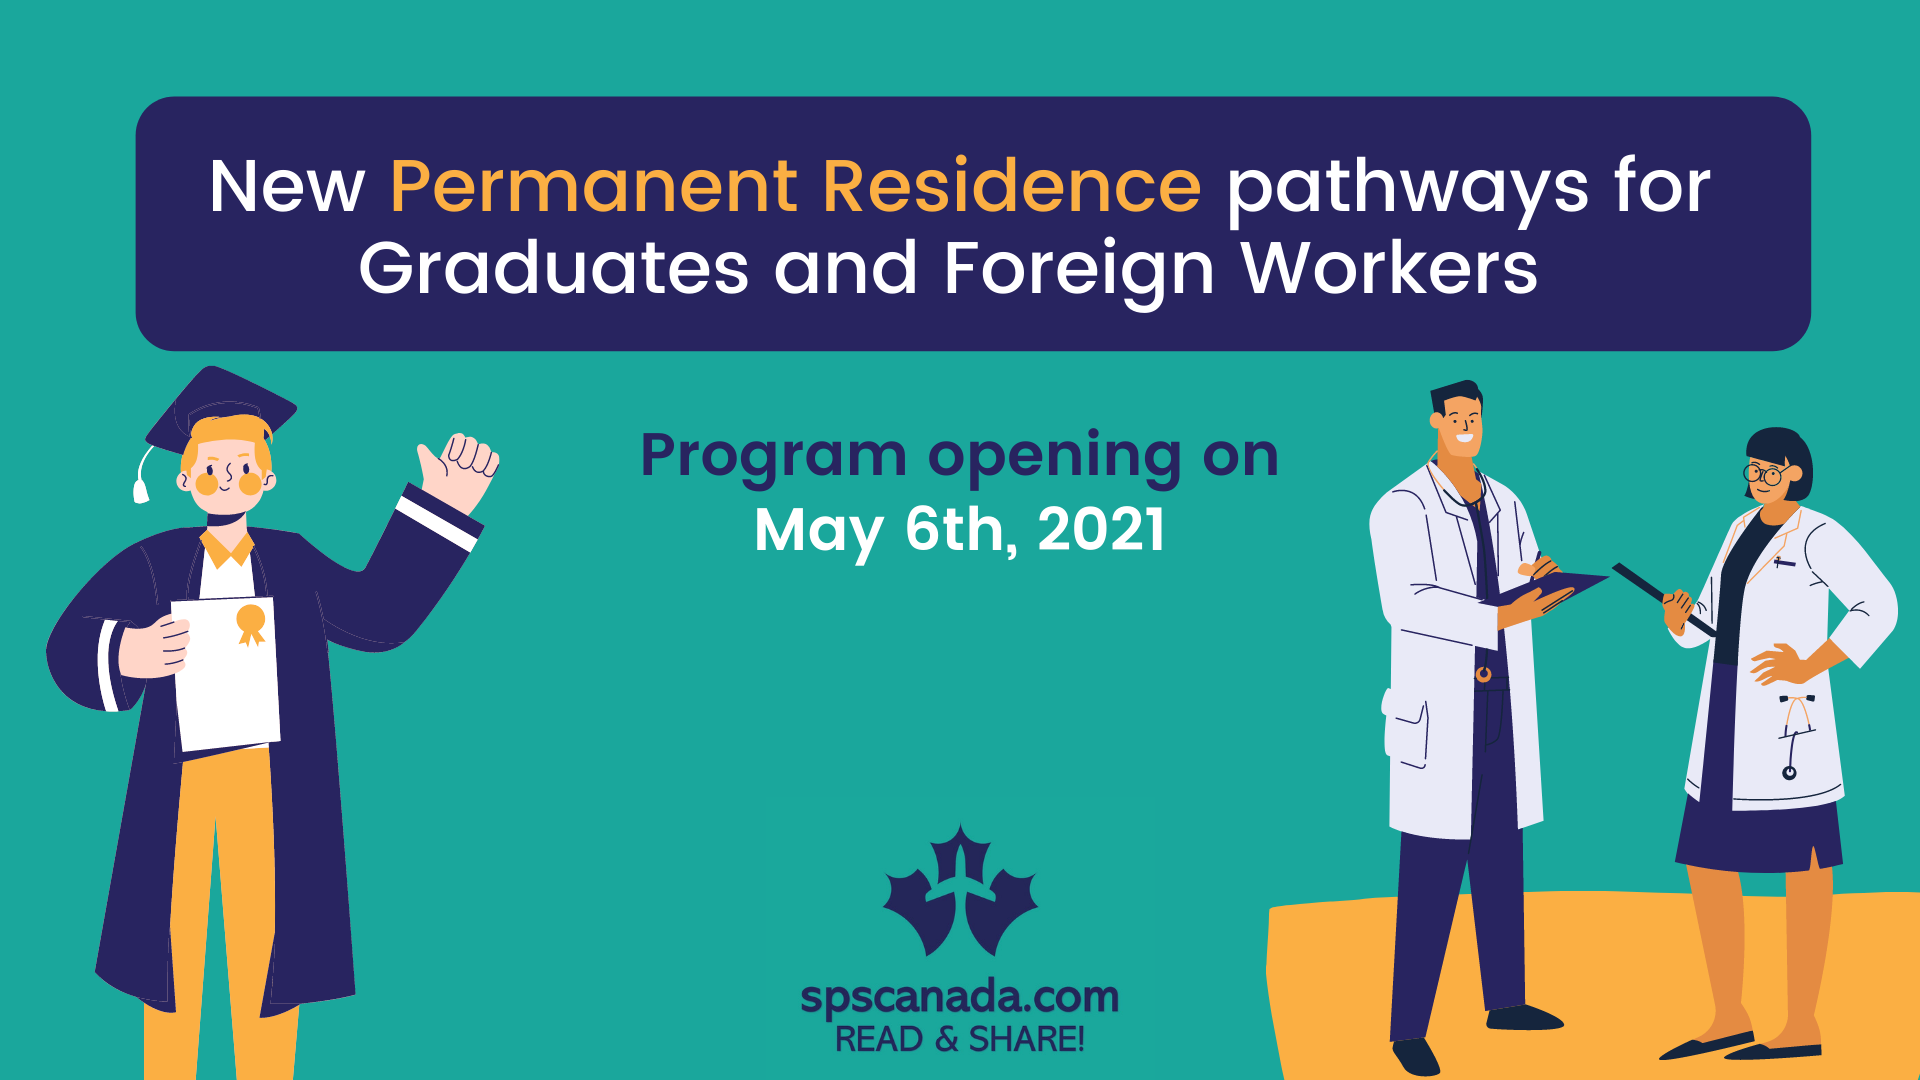 New Pathway to Permanent Residence for International Students and Foreign Workers, opening May 6th, 2021